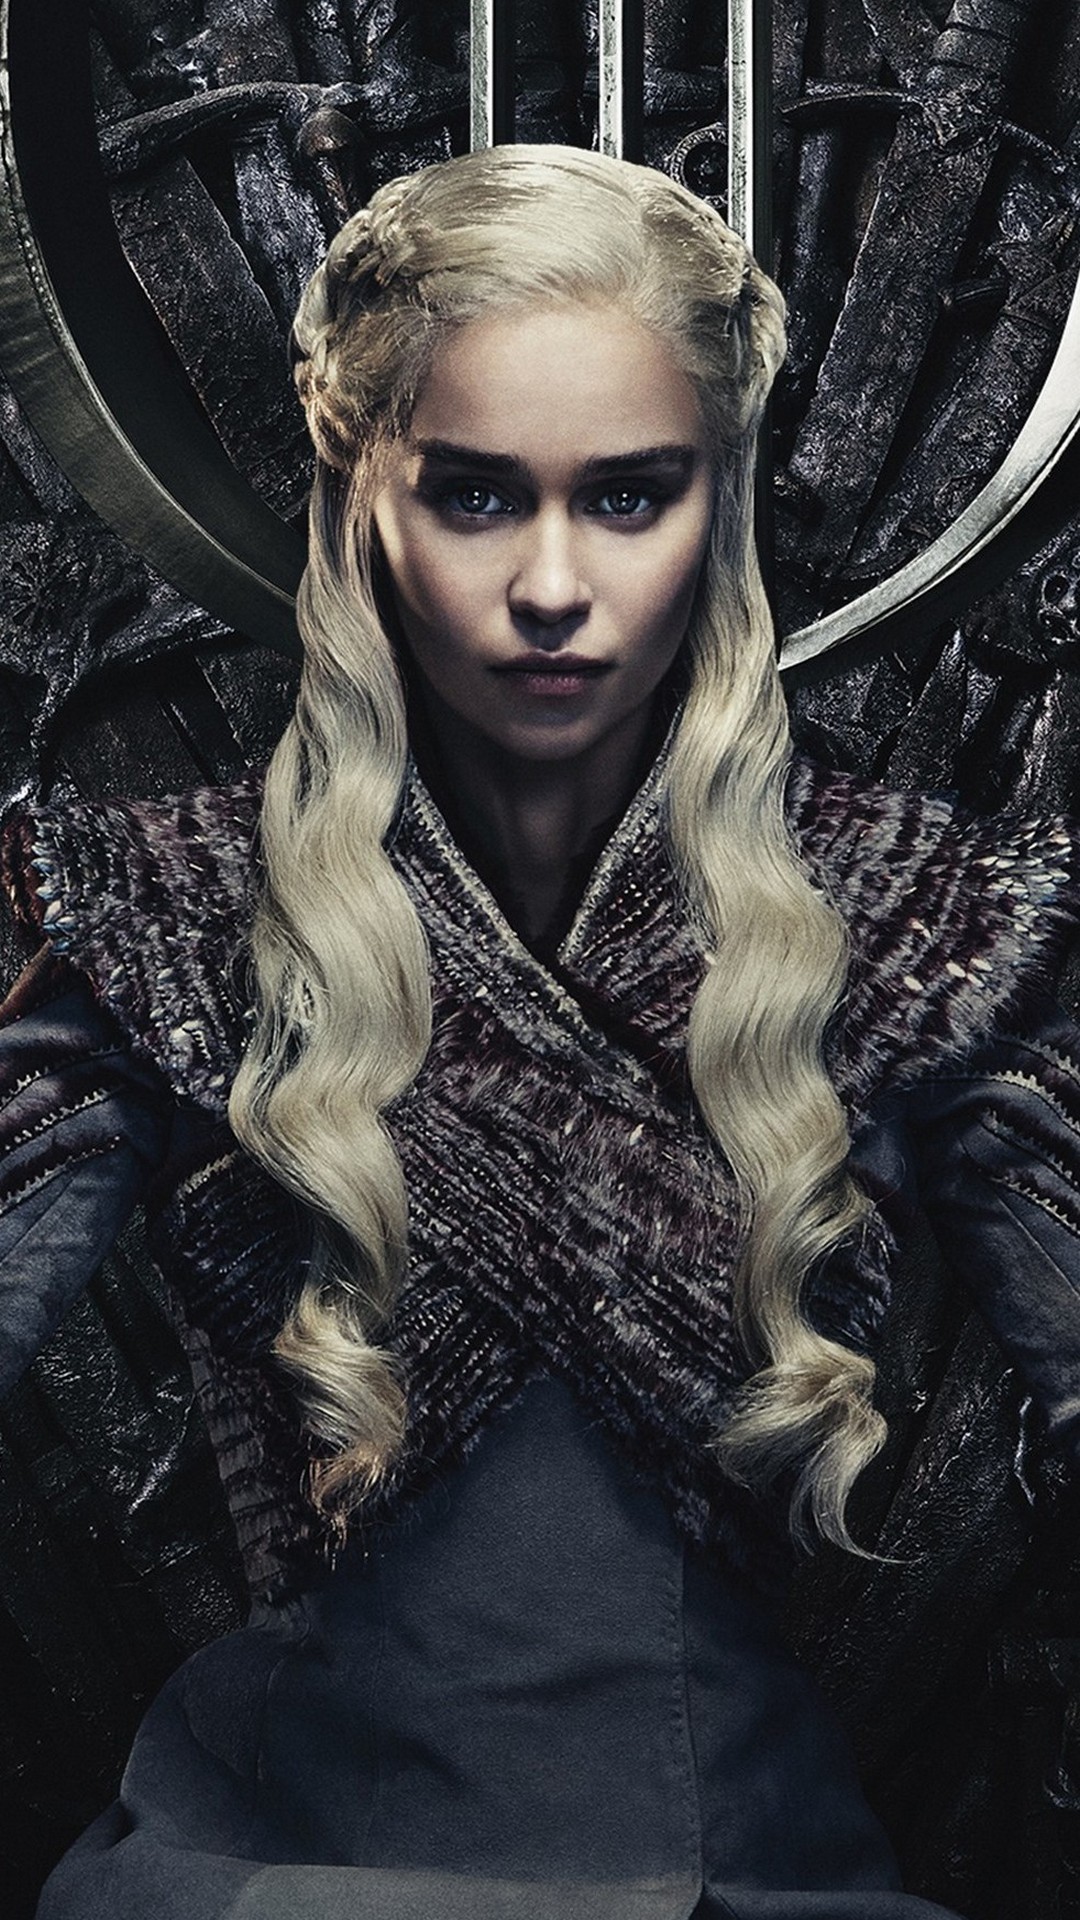 Game of Thrones 8 Season Wallpaper For iPhone 2019 3D iPhone